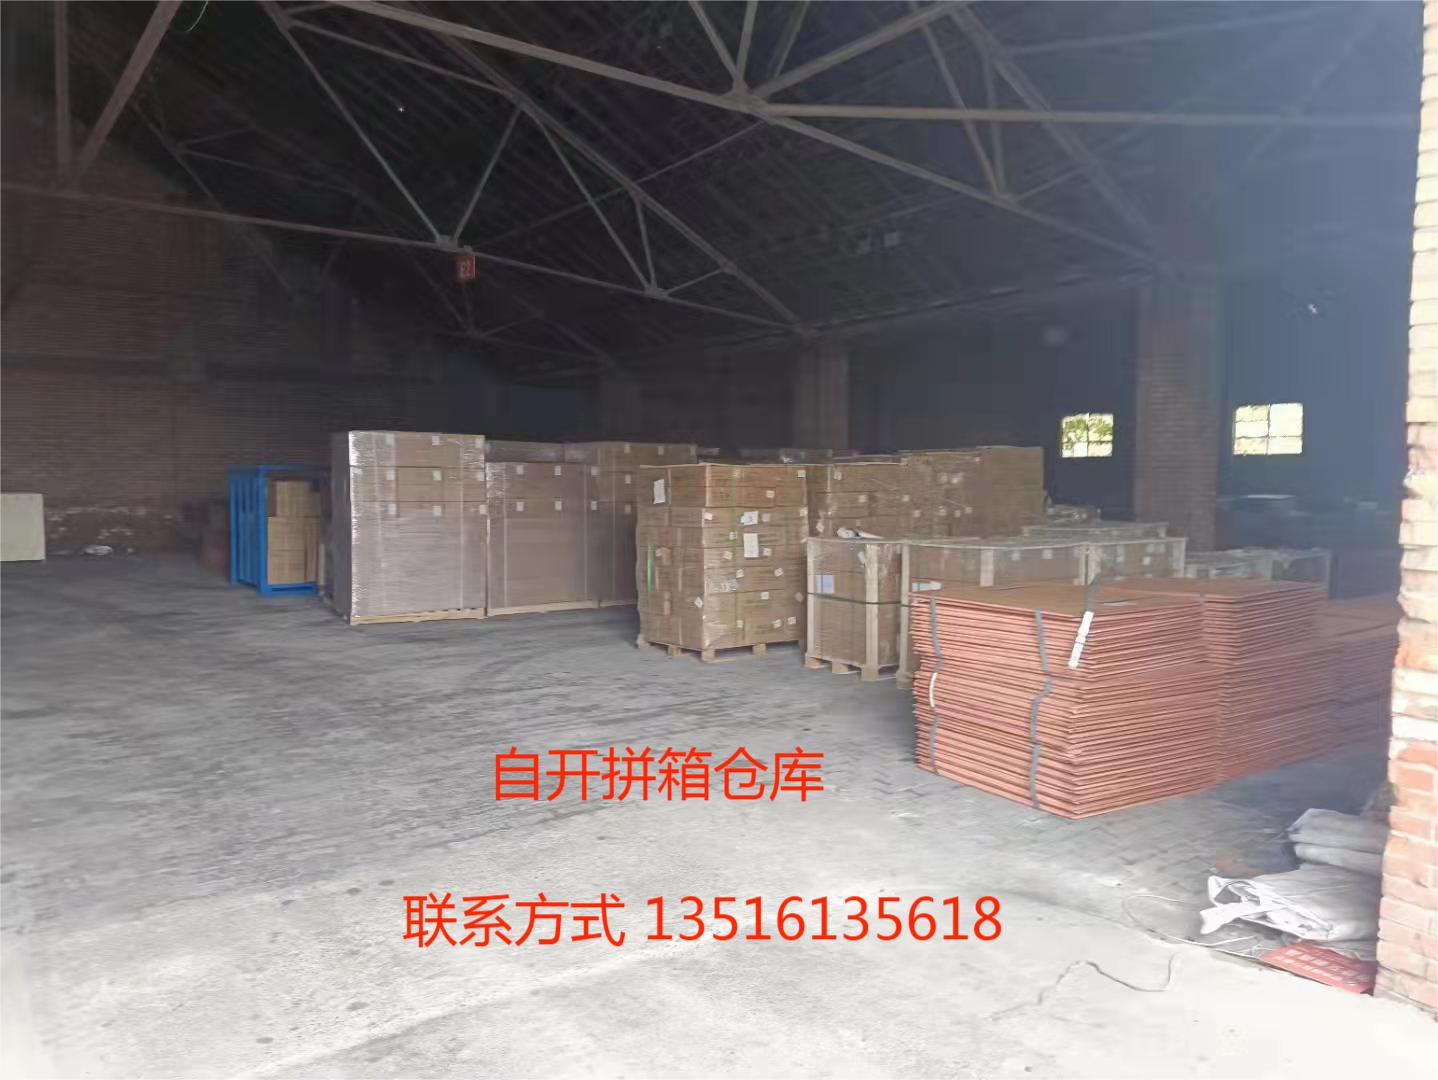 Full-mirror Shuangqing logistics from China to Russia